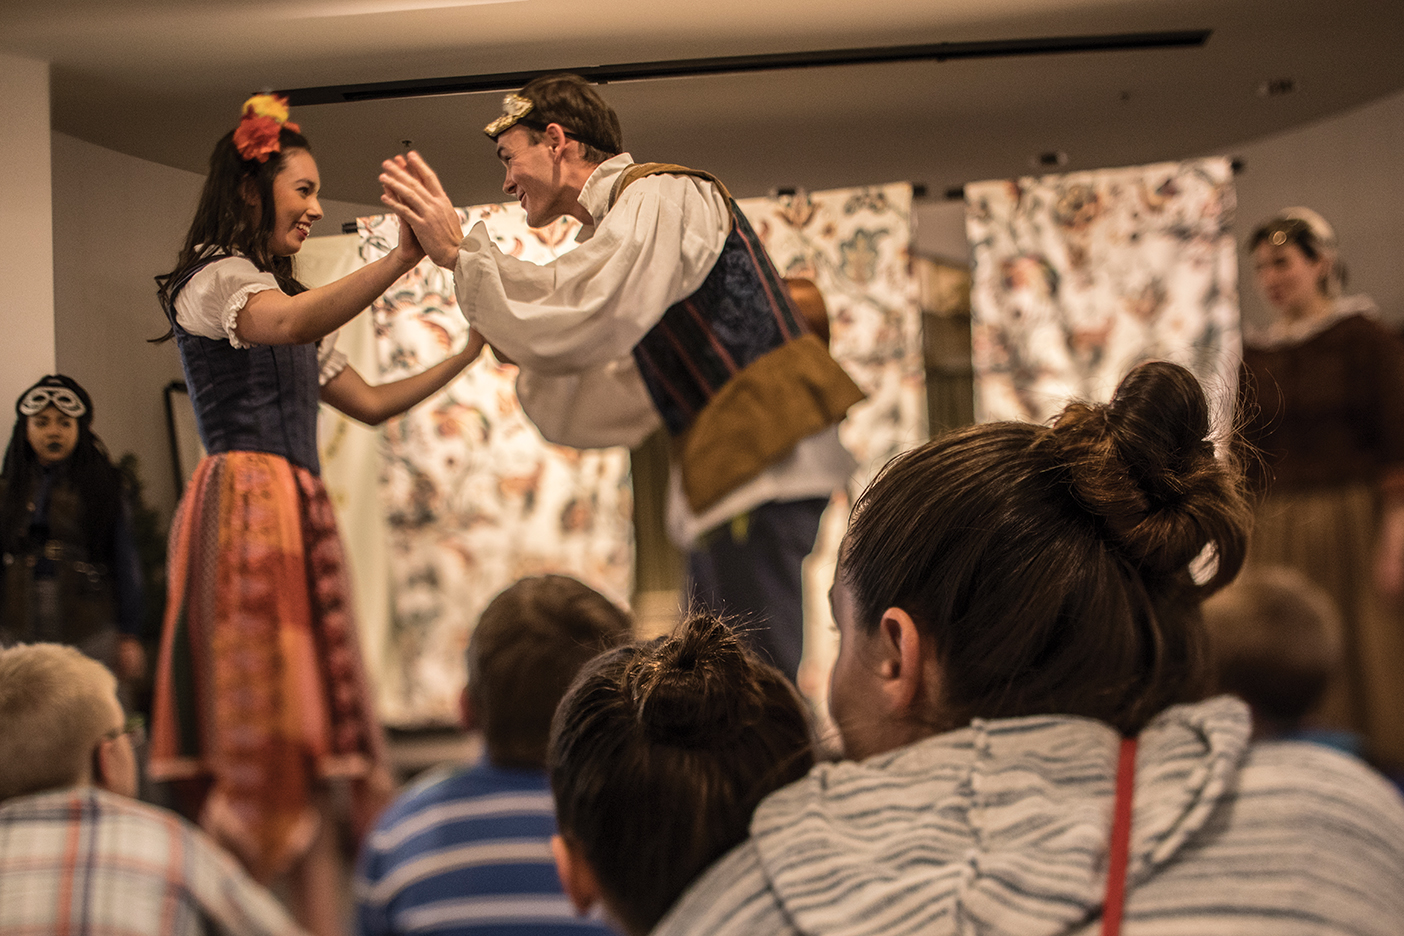 A young woman and young man portray the parts of Romeo and Julieta in the bilingual play.